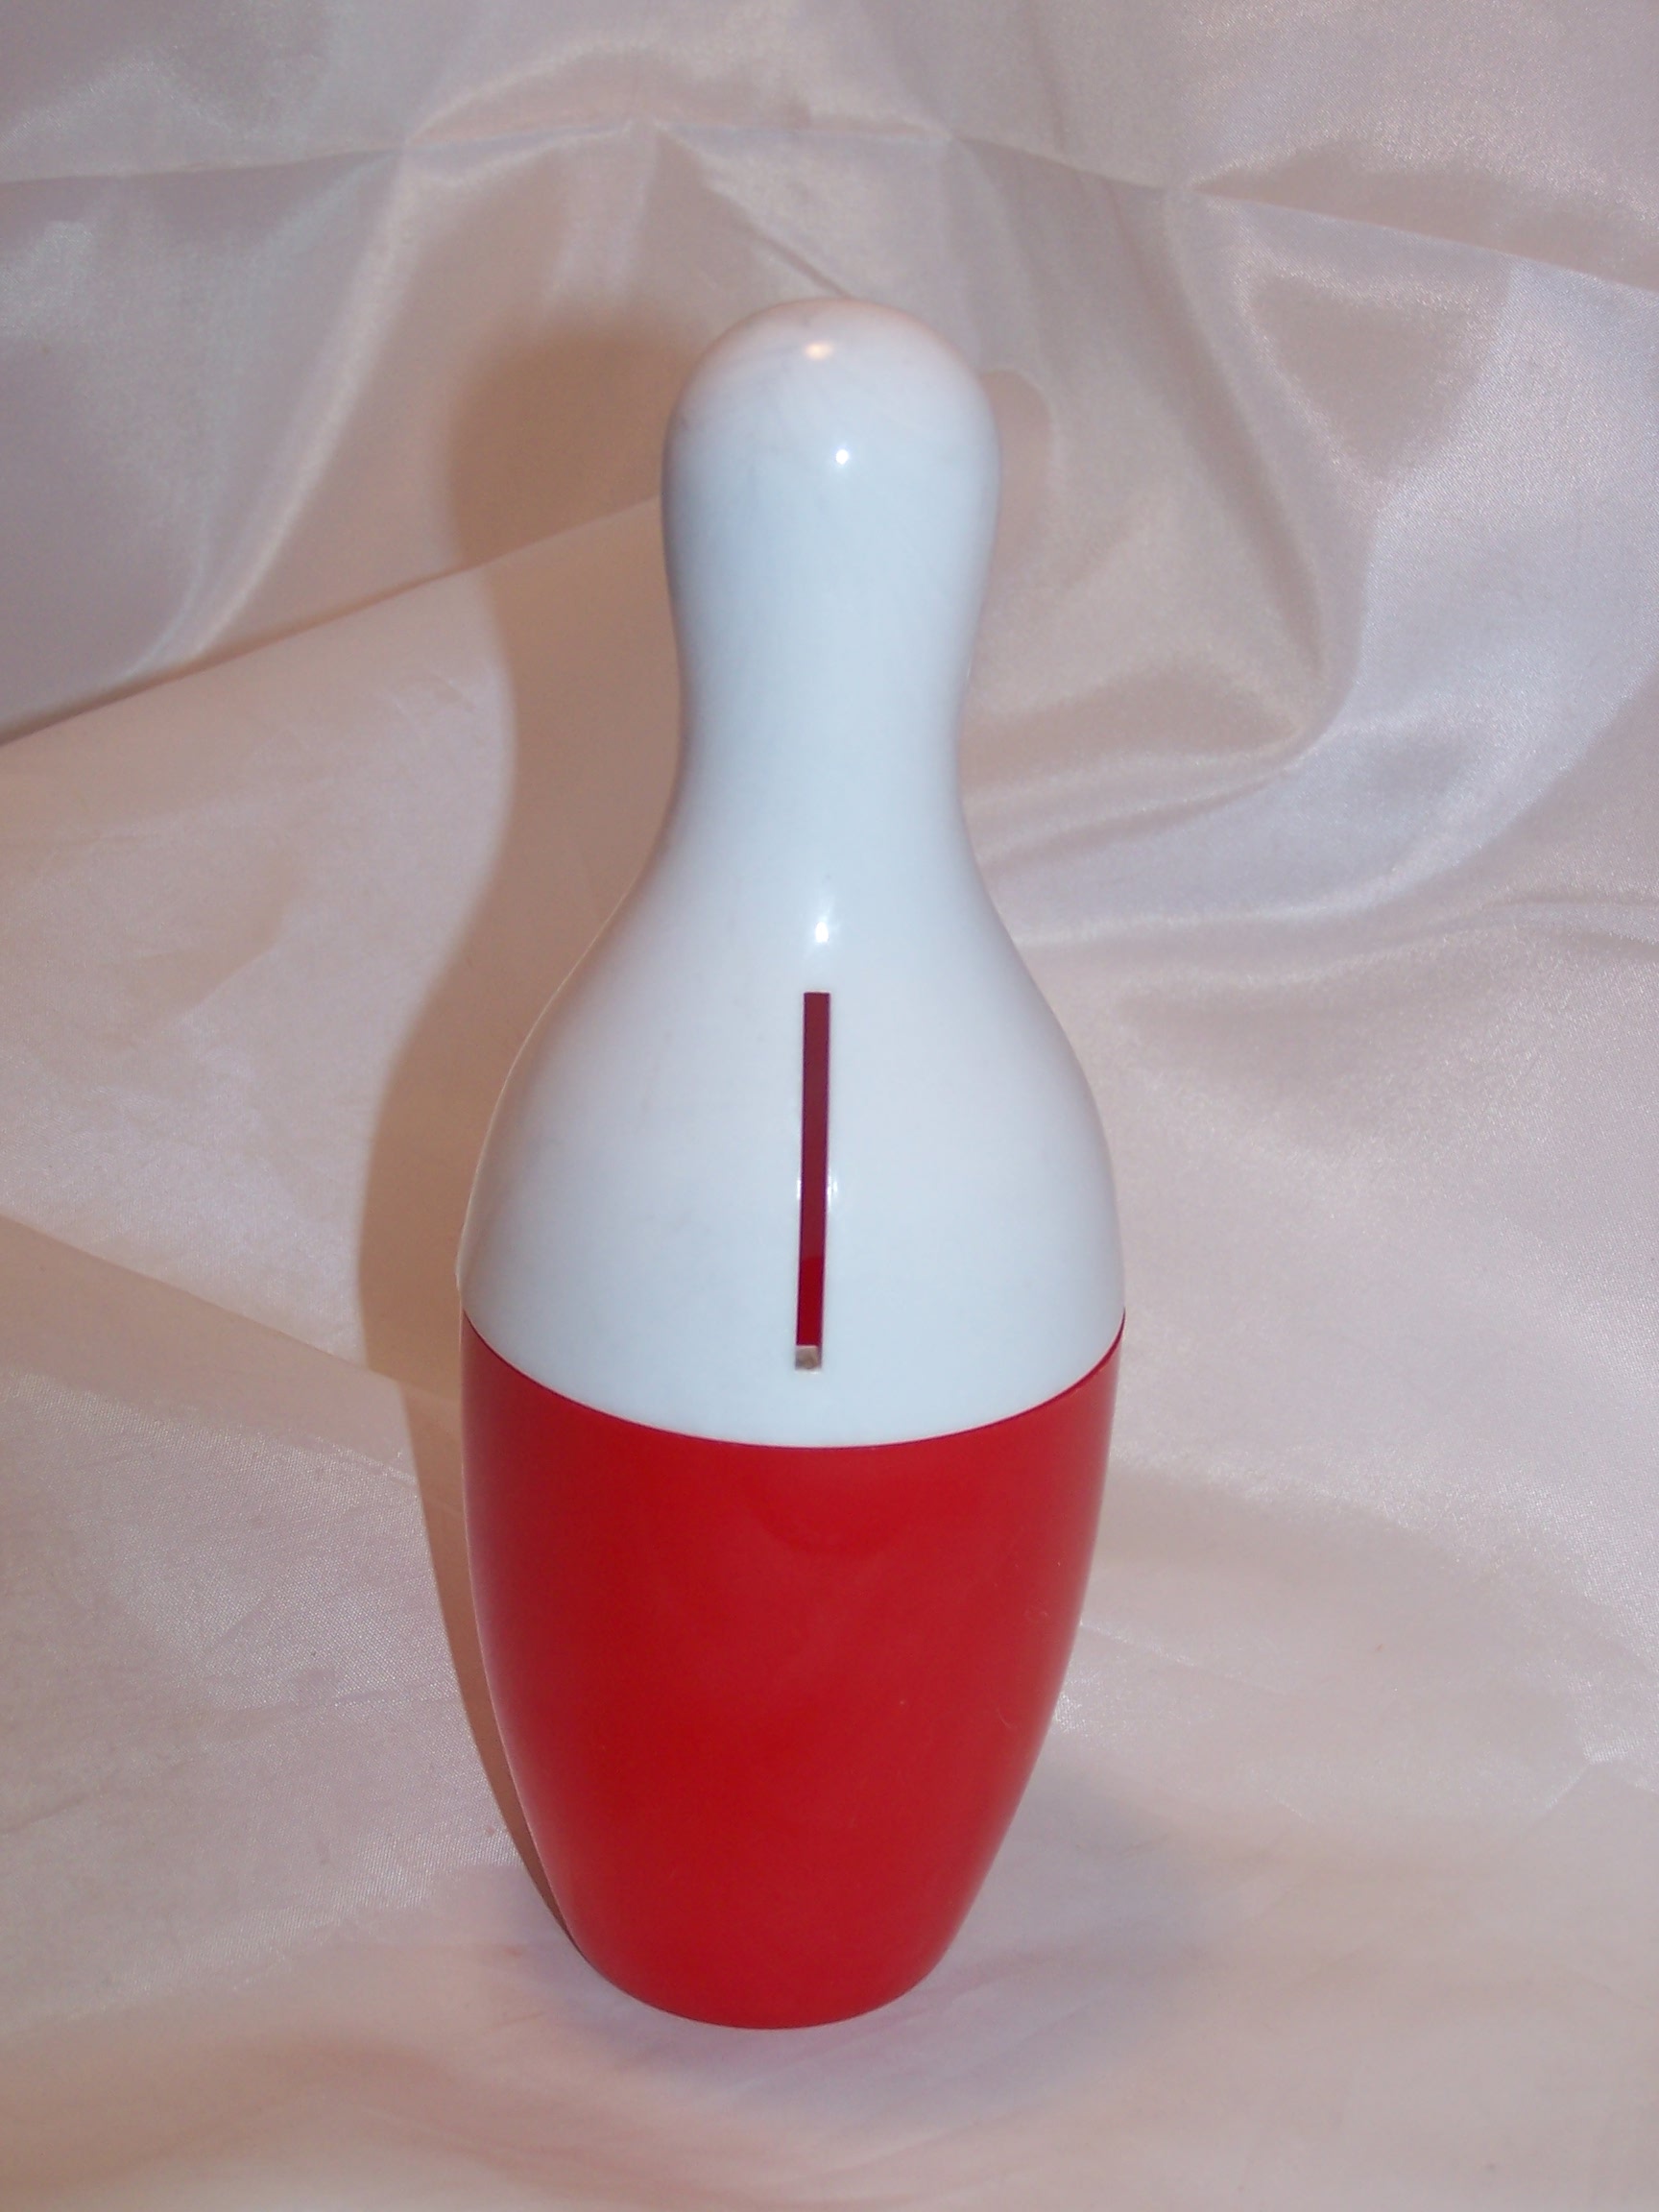 Image 2 of Bowling Pin Money Pete Bank, Red Eyes and Buttons, Spare Time